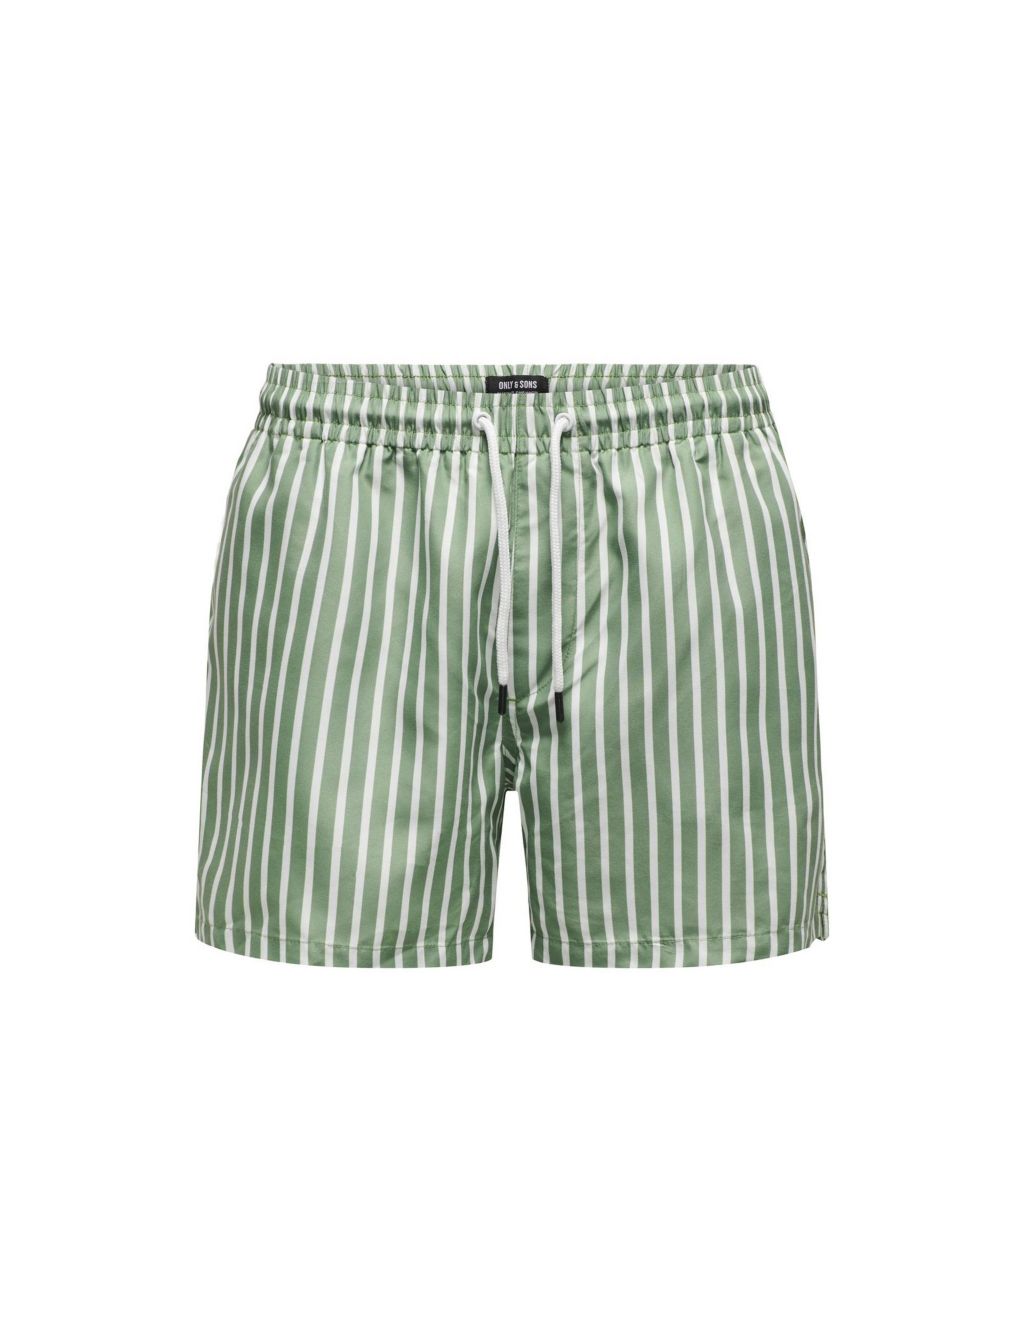 Pocketed Striped Swim Shorts 1 of 2